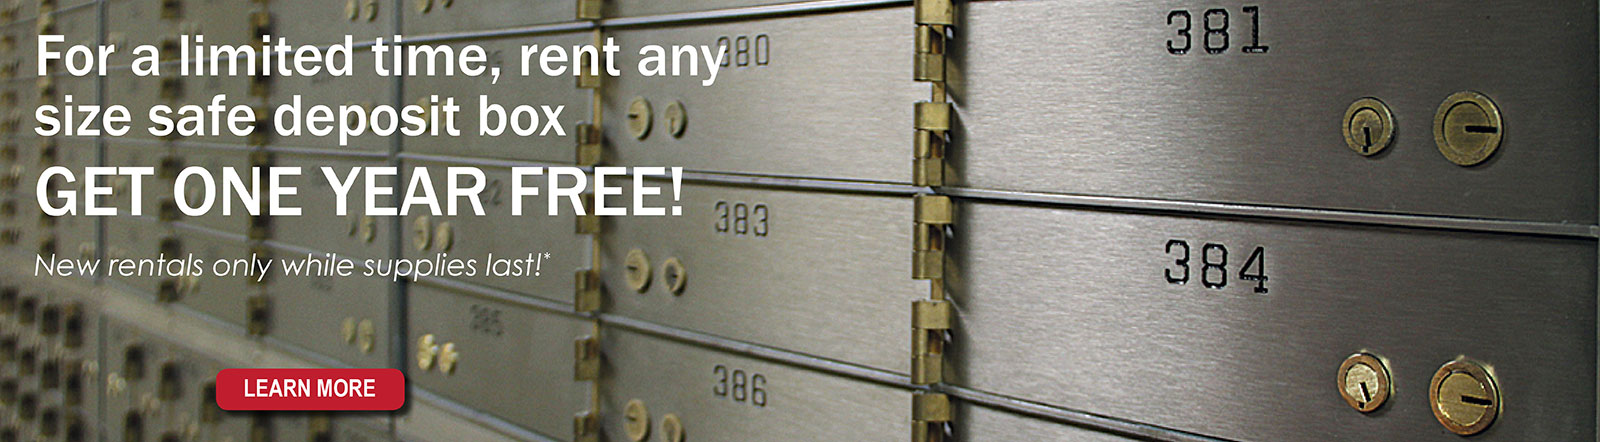 For a limited time, rent any size safe deposit box and get one year free.